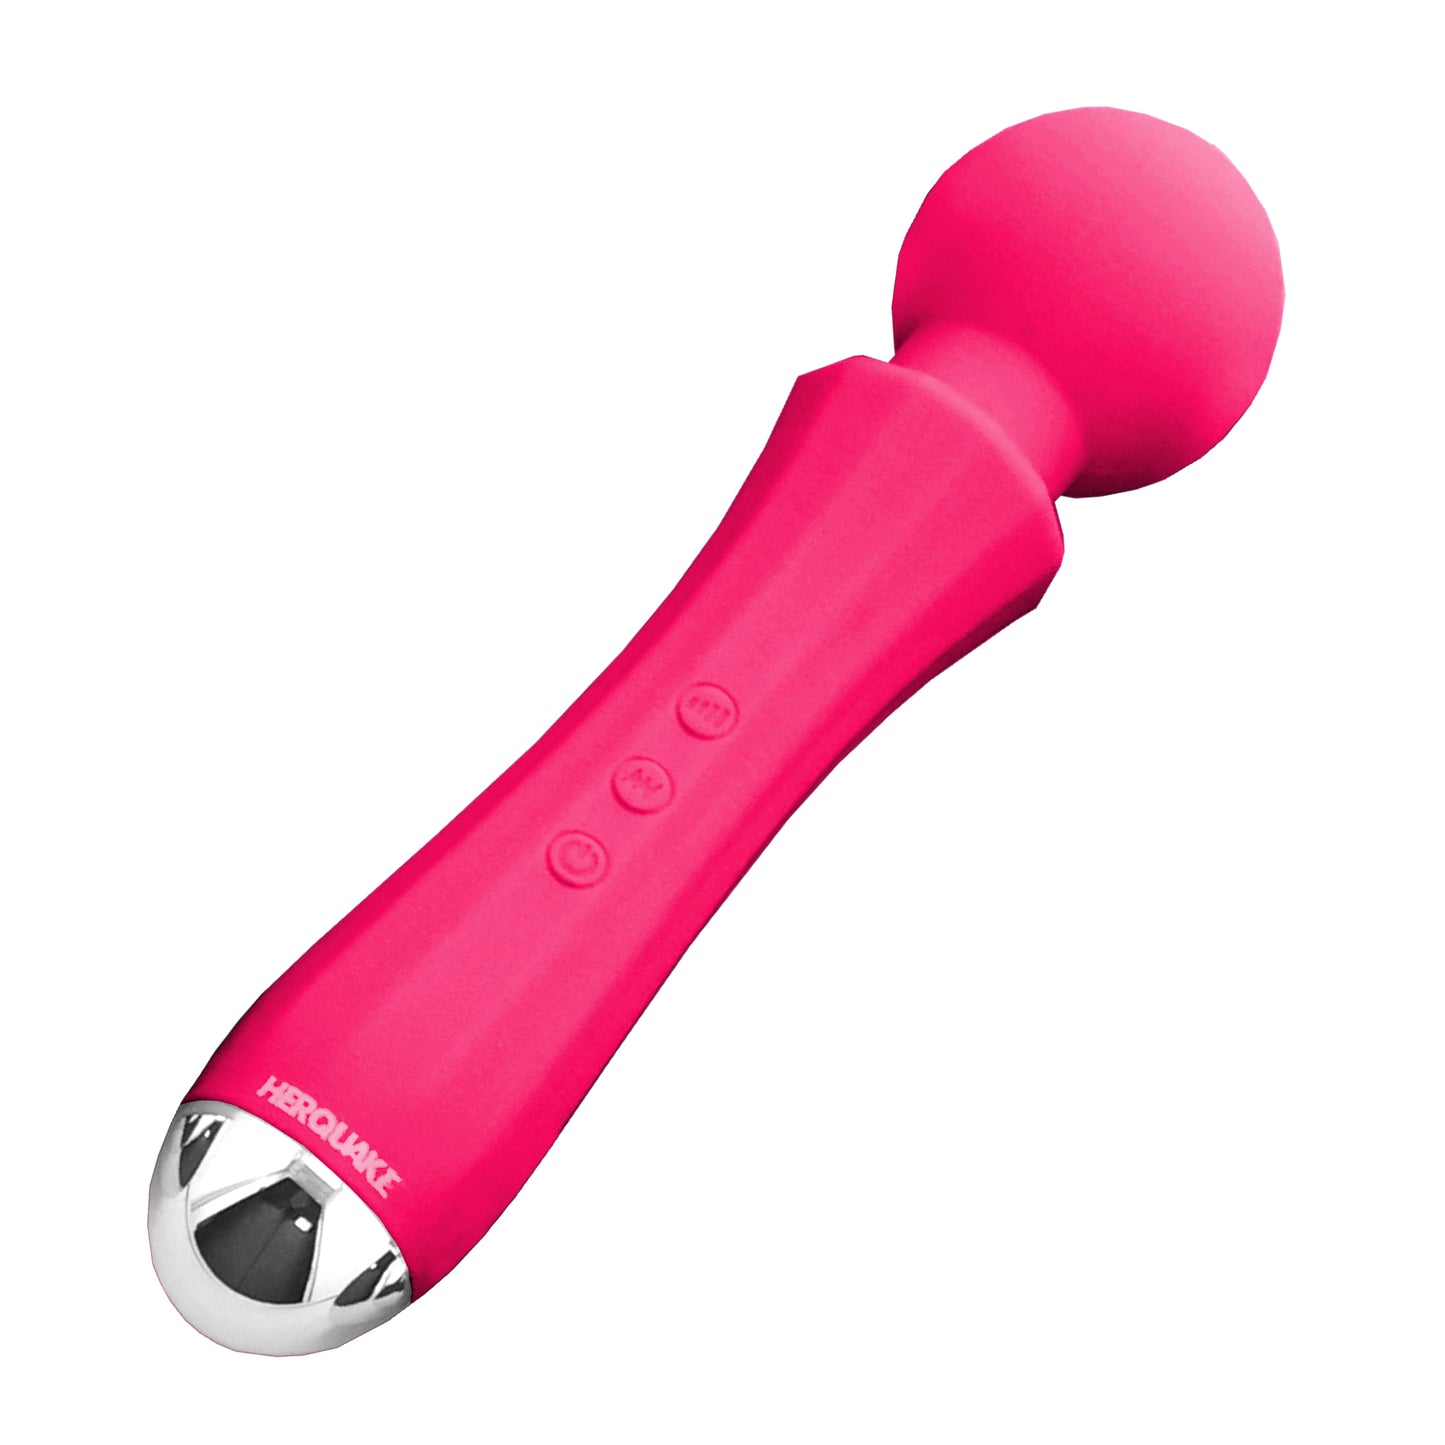 Super Strong Wand Vibrator - The Aftershock